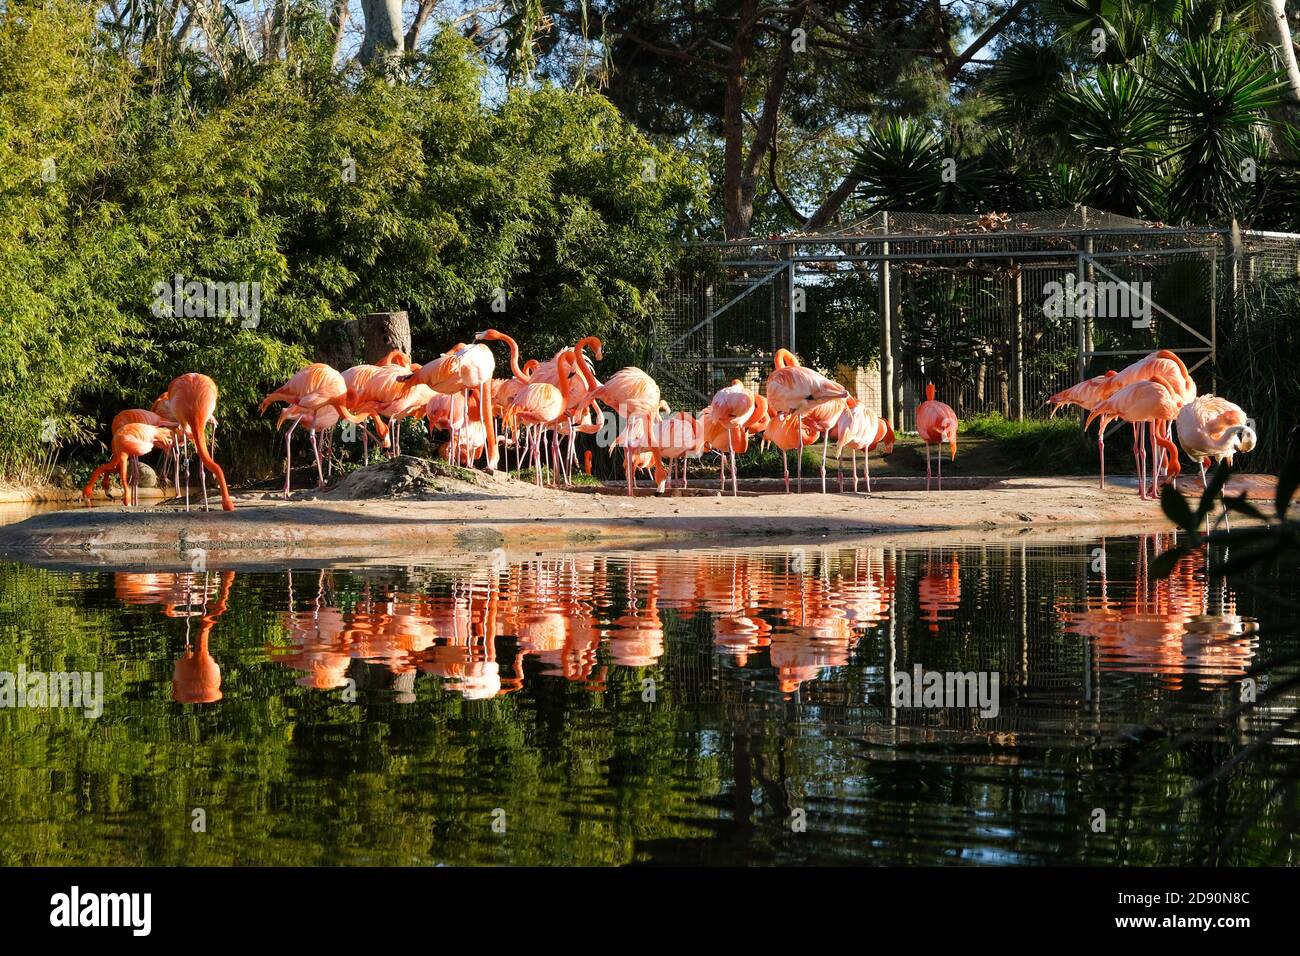 Lake with beautiful pink flamingos surrounded with lush plants on a sunny day in Barcelona, Spain. Stock Photo